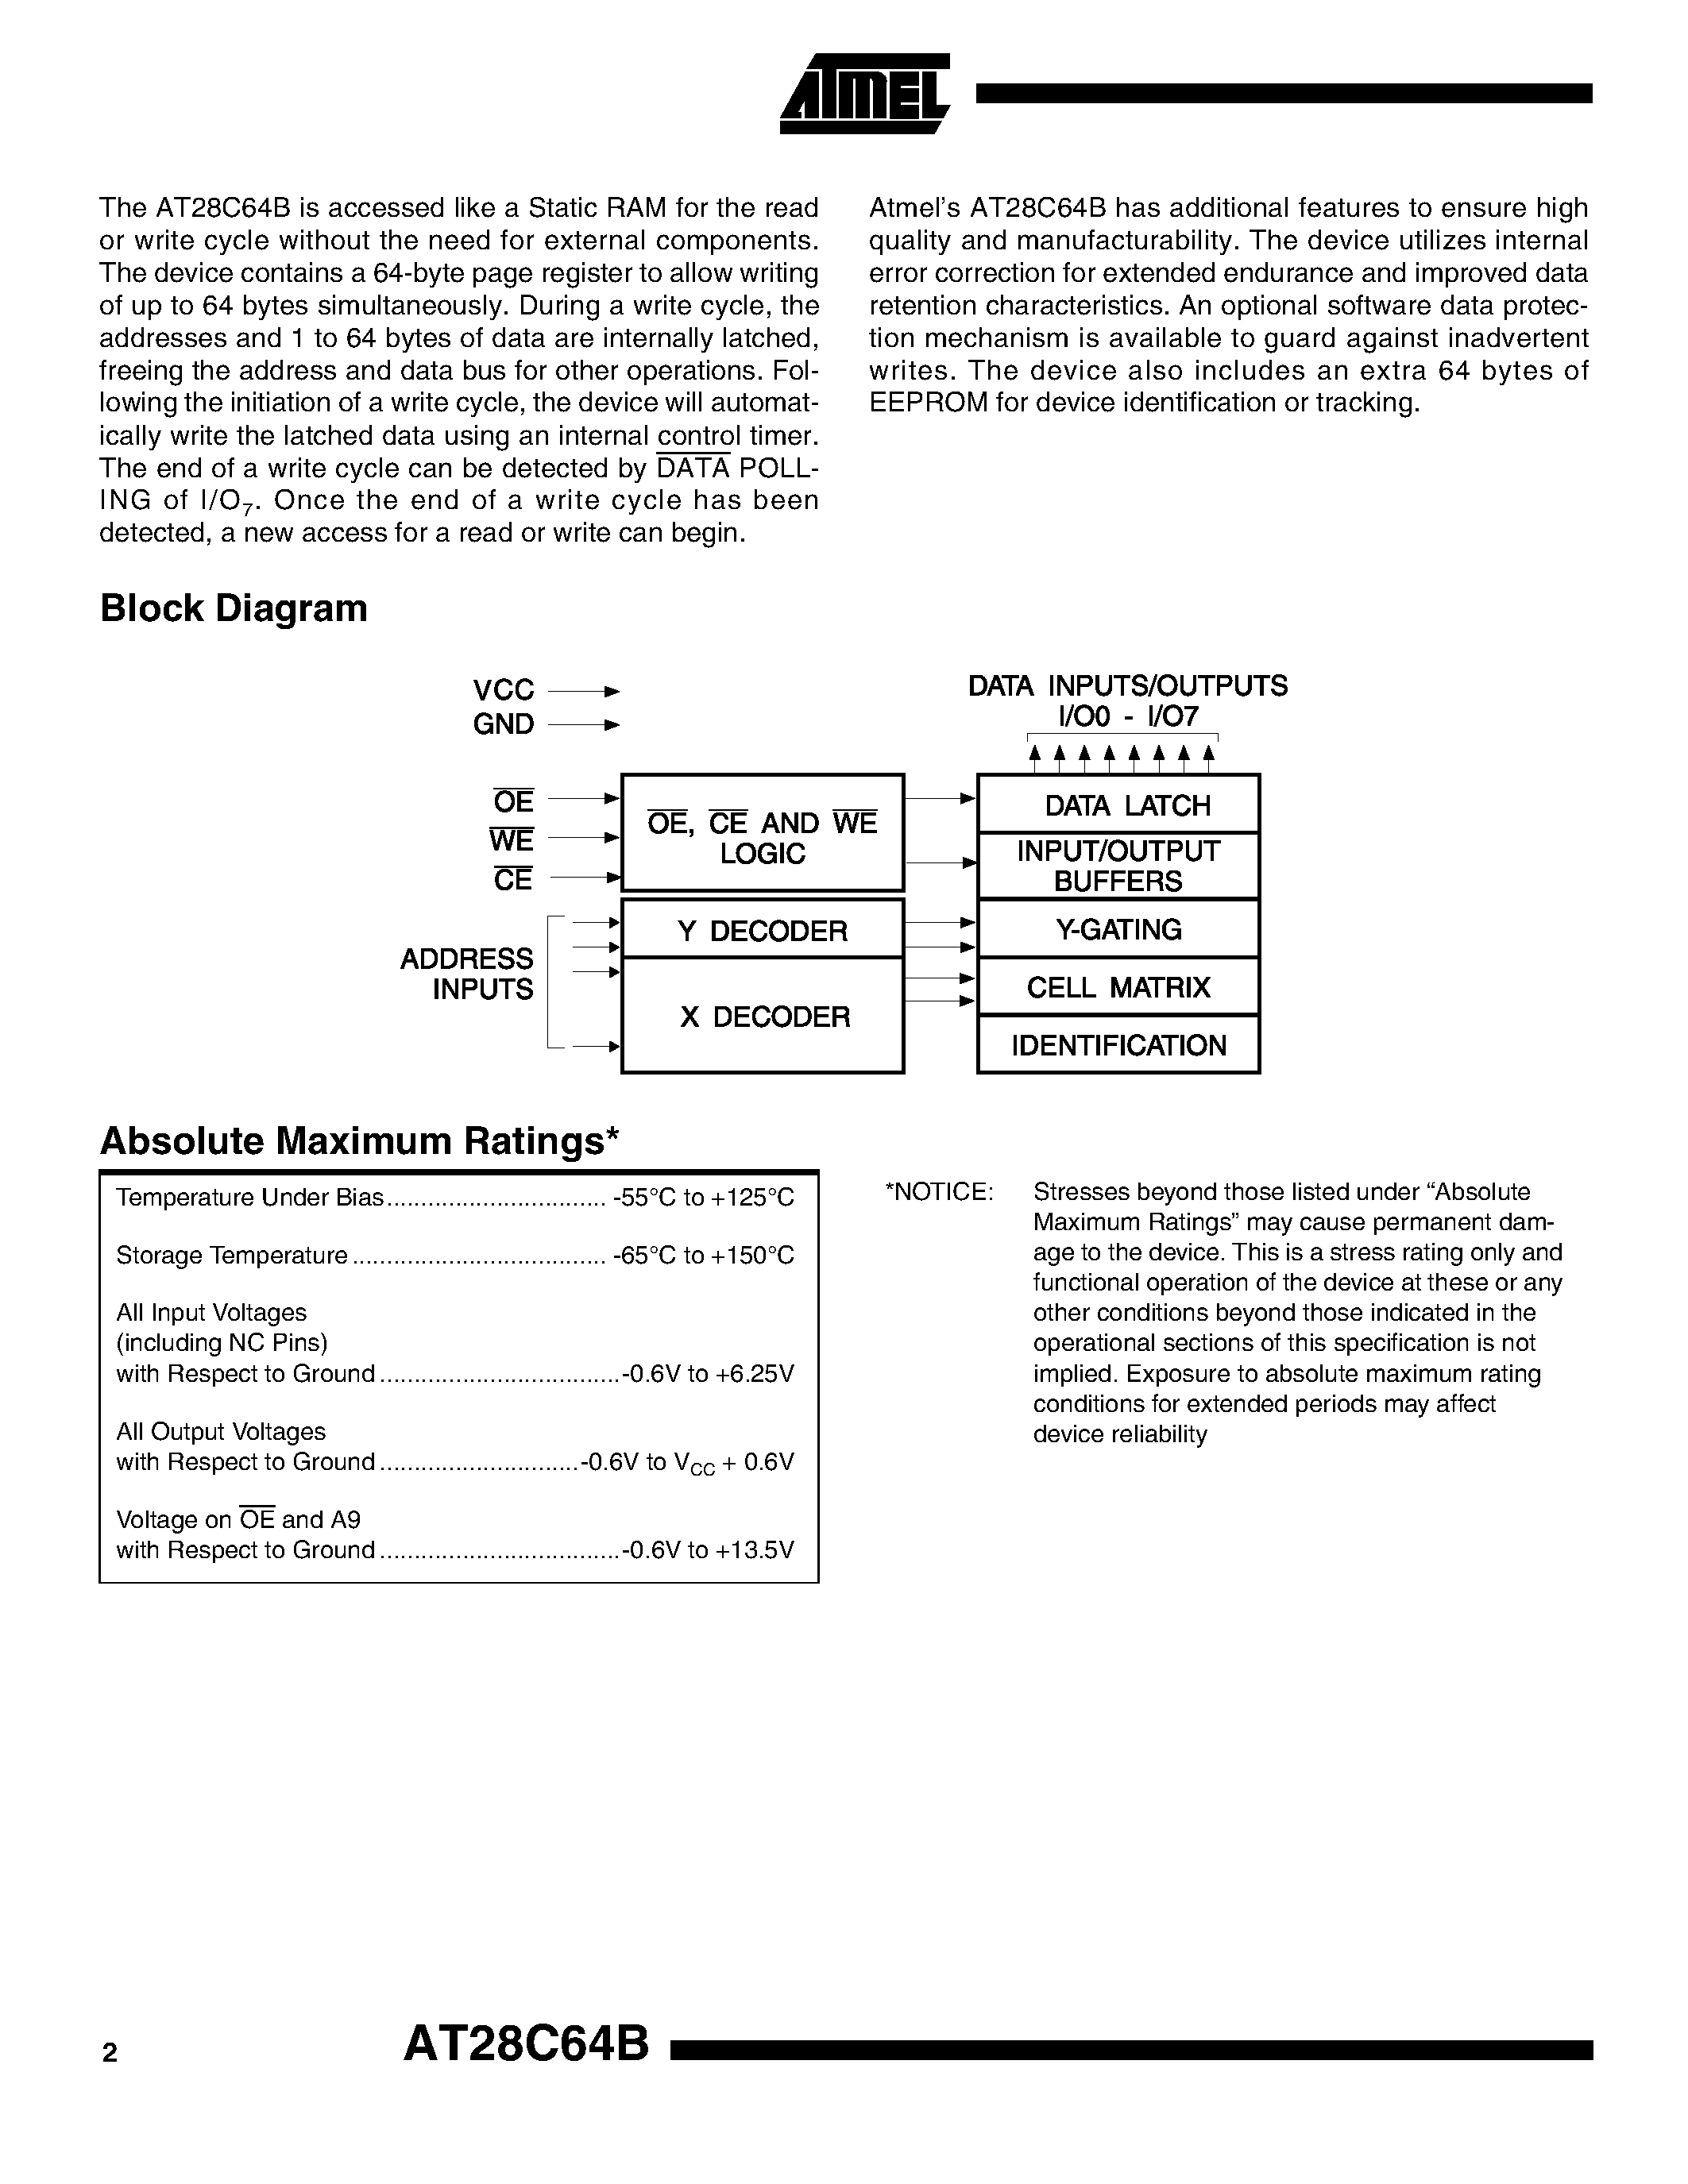 Datasheet AT28C64B-W - 64K (8K x 8) CMOS E2PROM with Page Write and Software Data Protection page 2